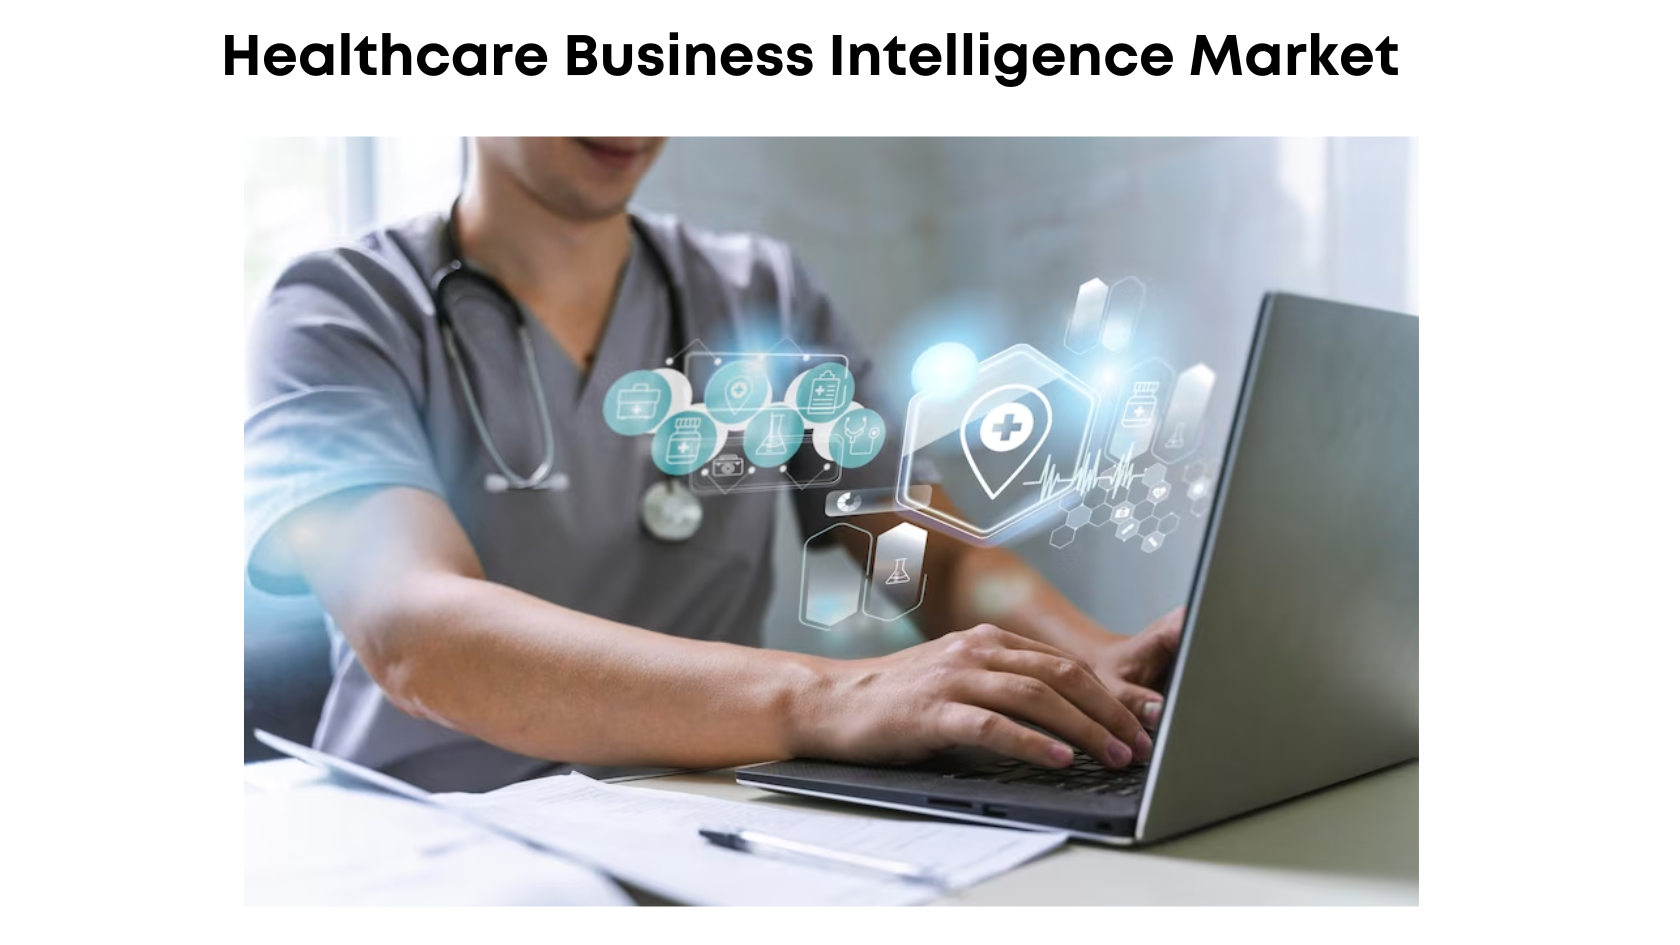 Healthcare Business Intelligence Market is Predicted USD 27.6 Billion in Revenues by 2032 at a CAGR of 13.4%